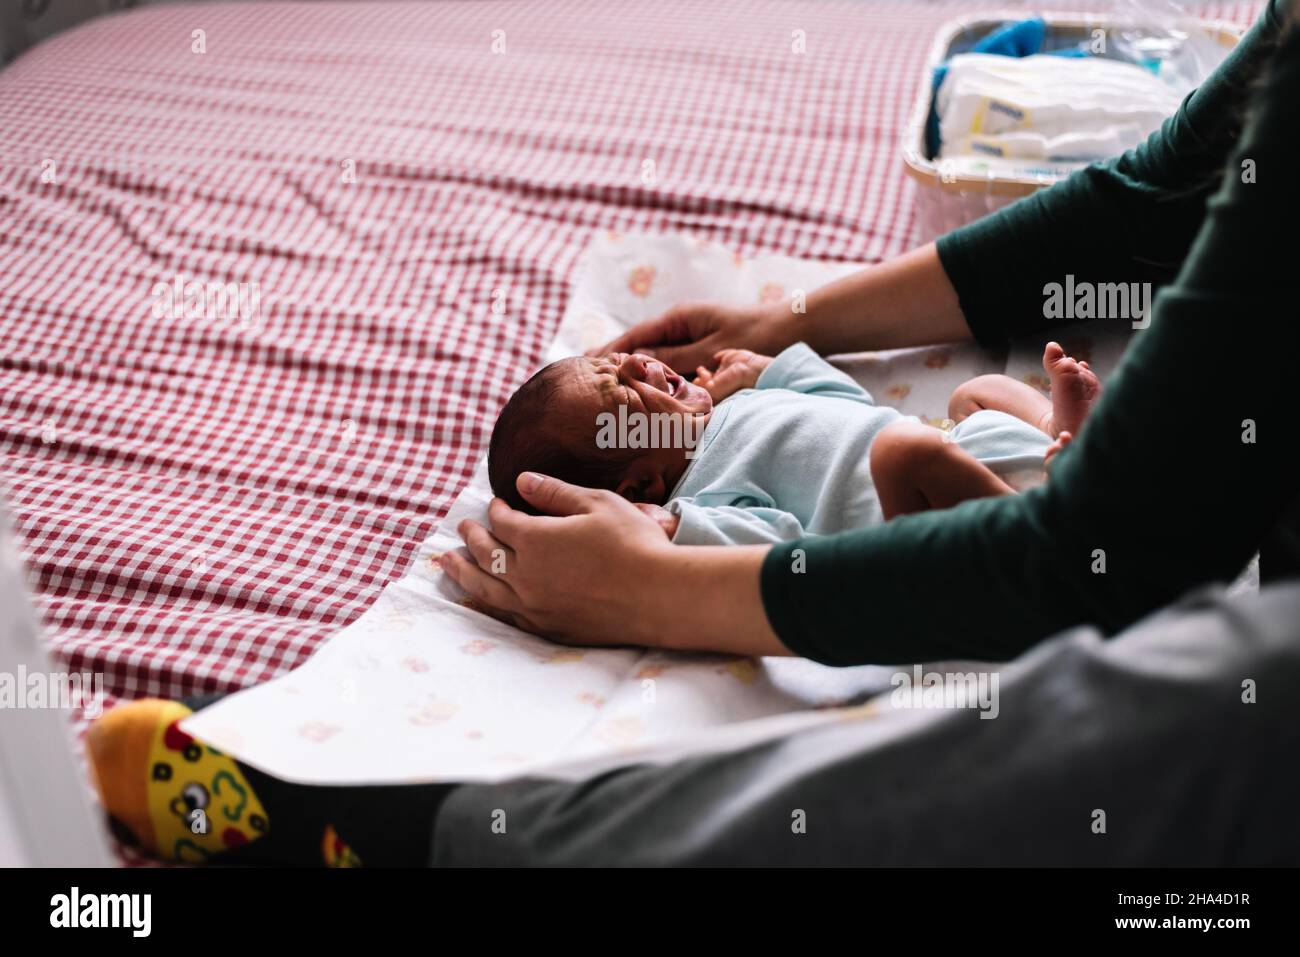 Mother changing her newborn baby in bed. Stock Photo